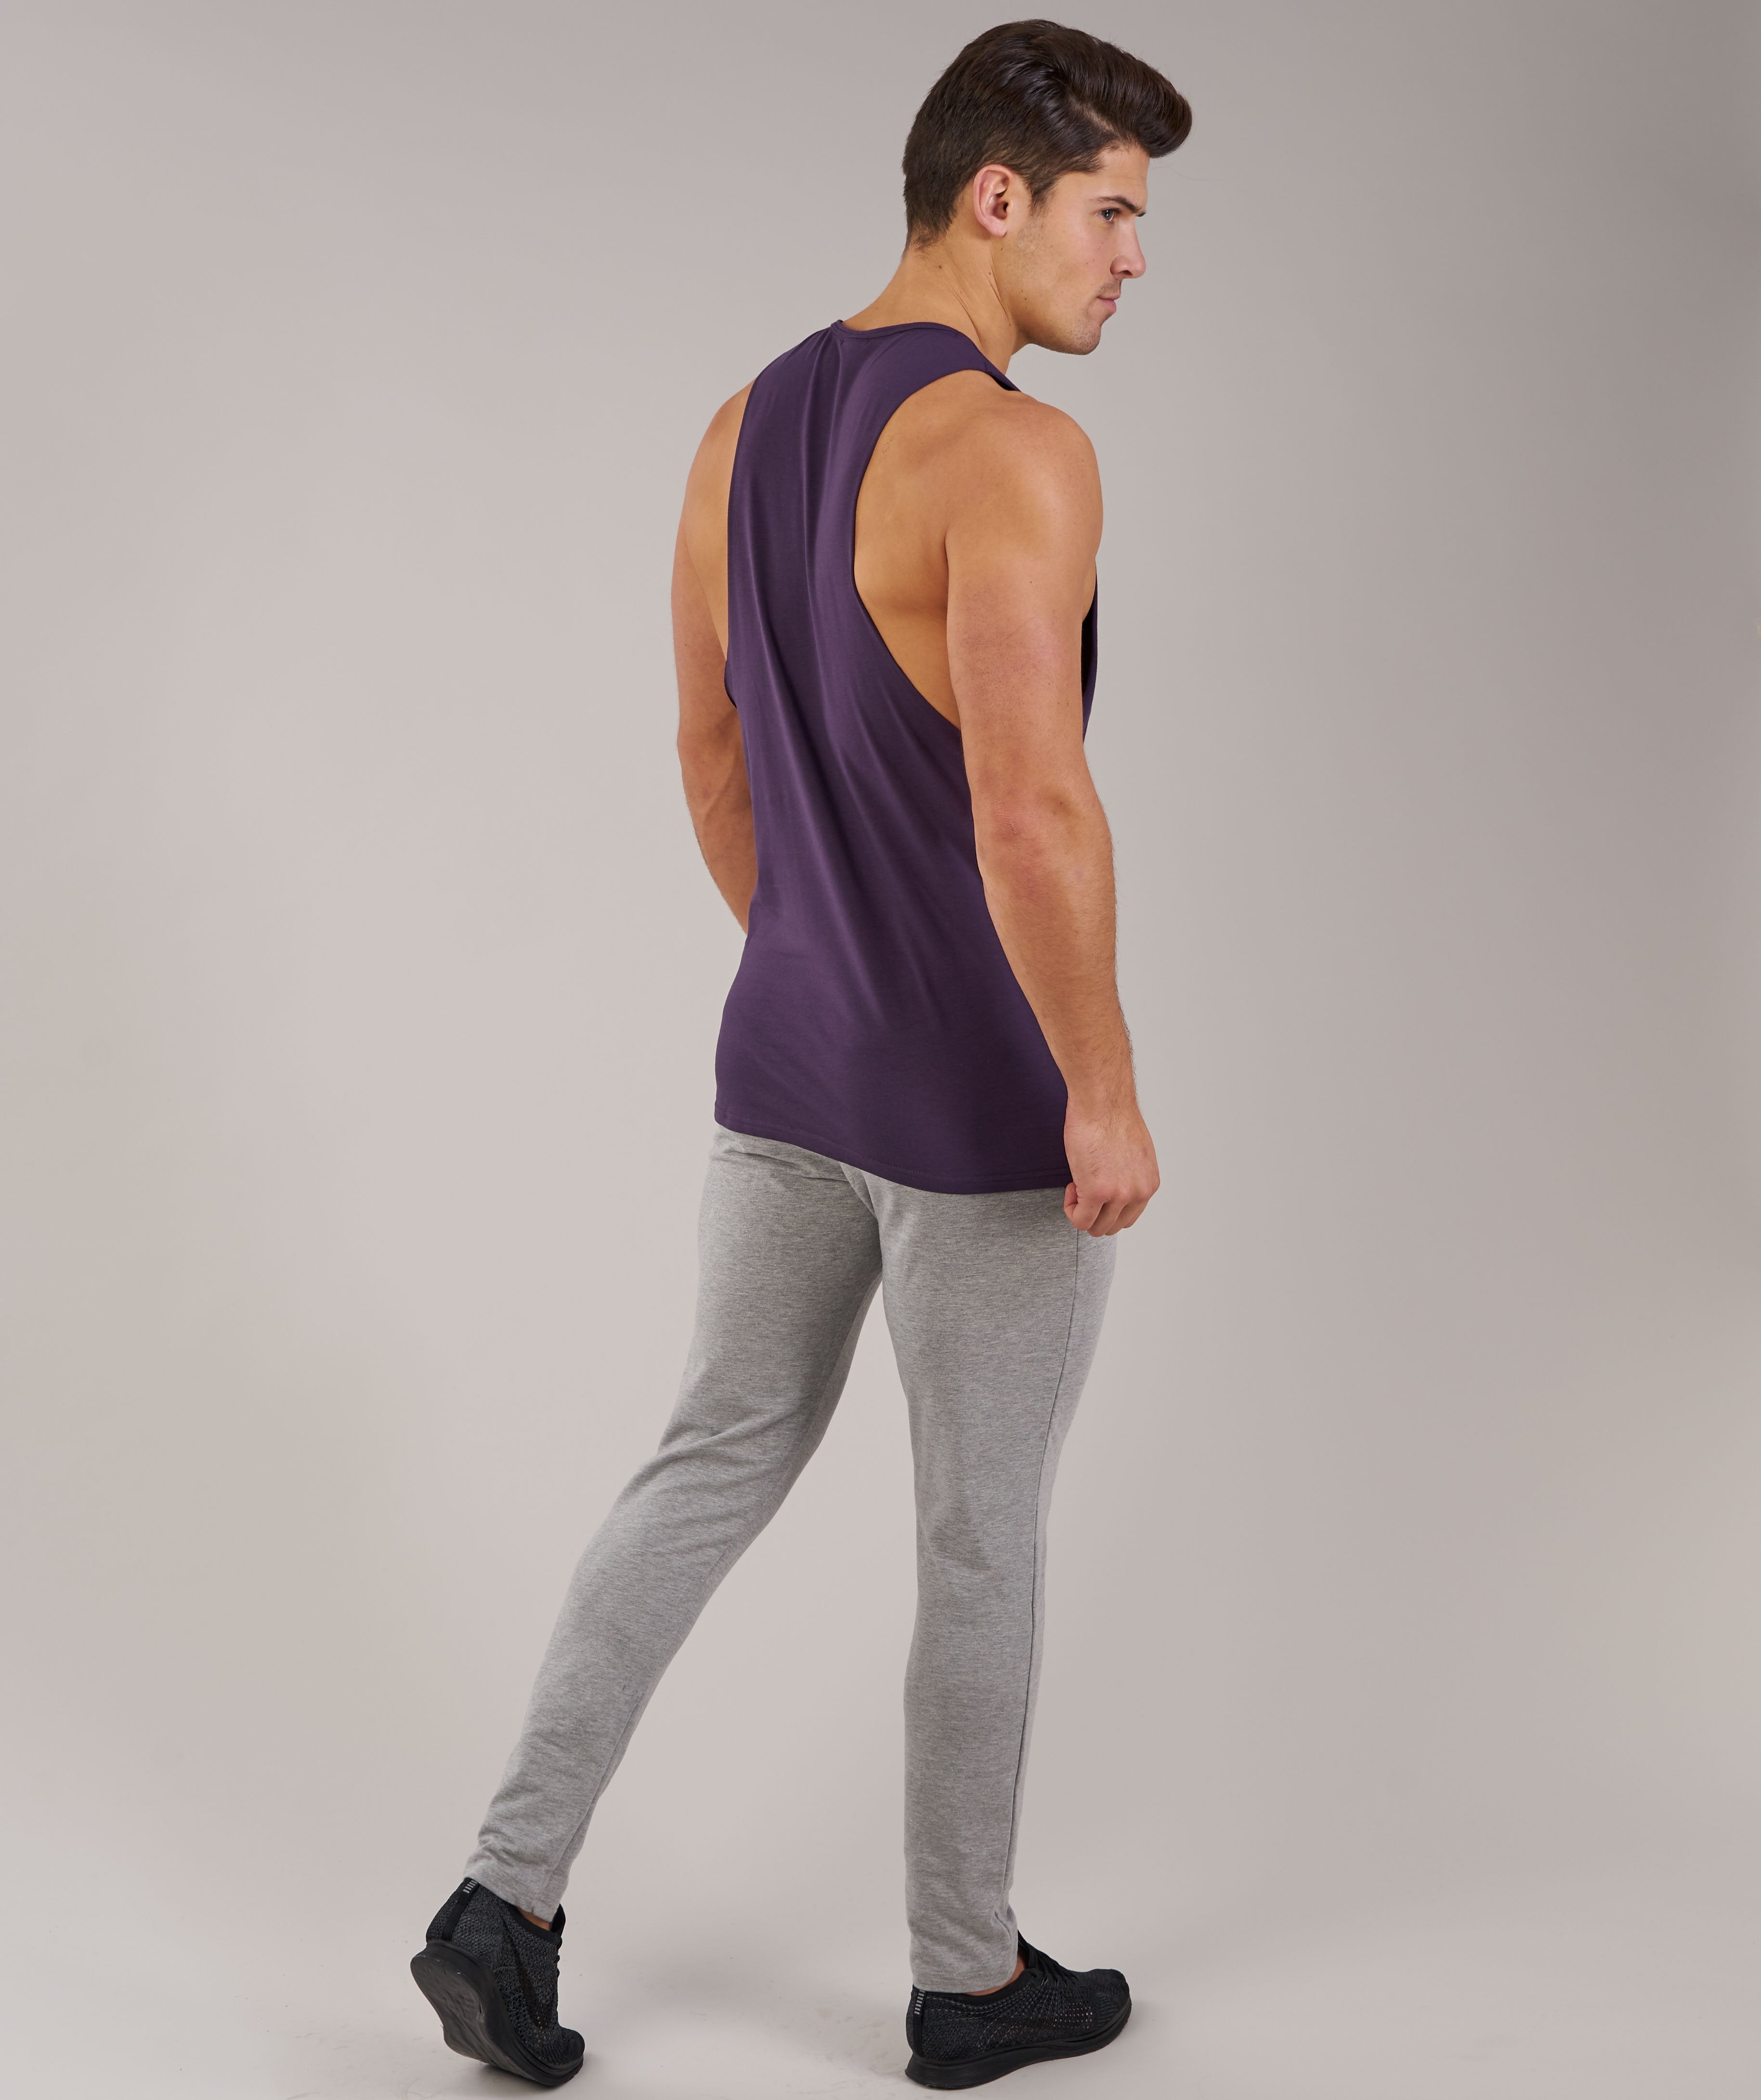 Fitness Drop Armhole Tank in Nightshade Purple - view 3